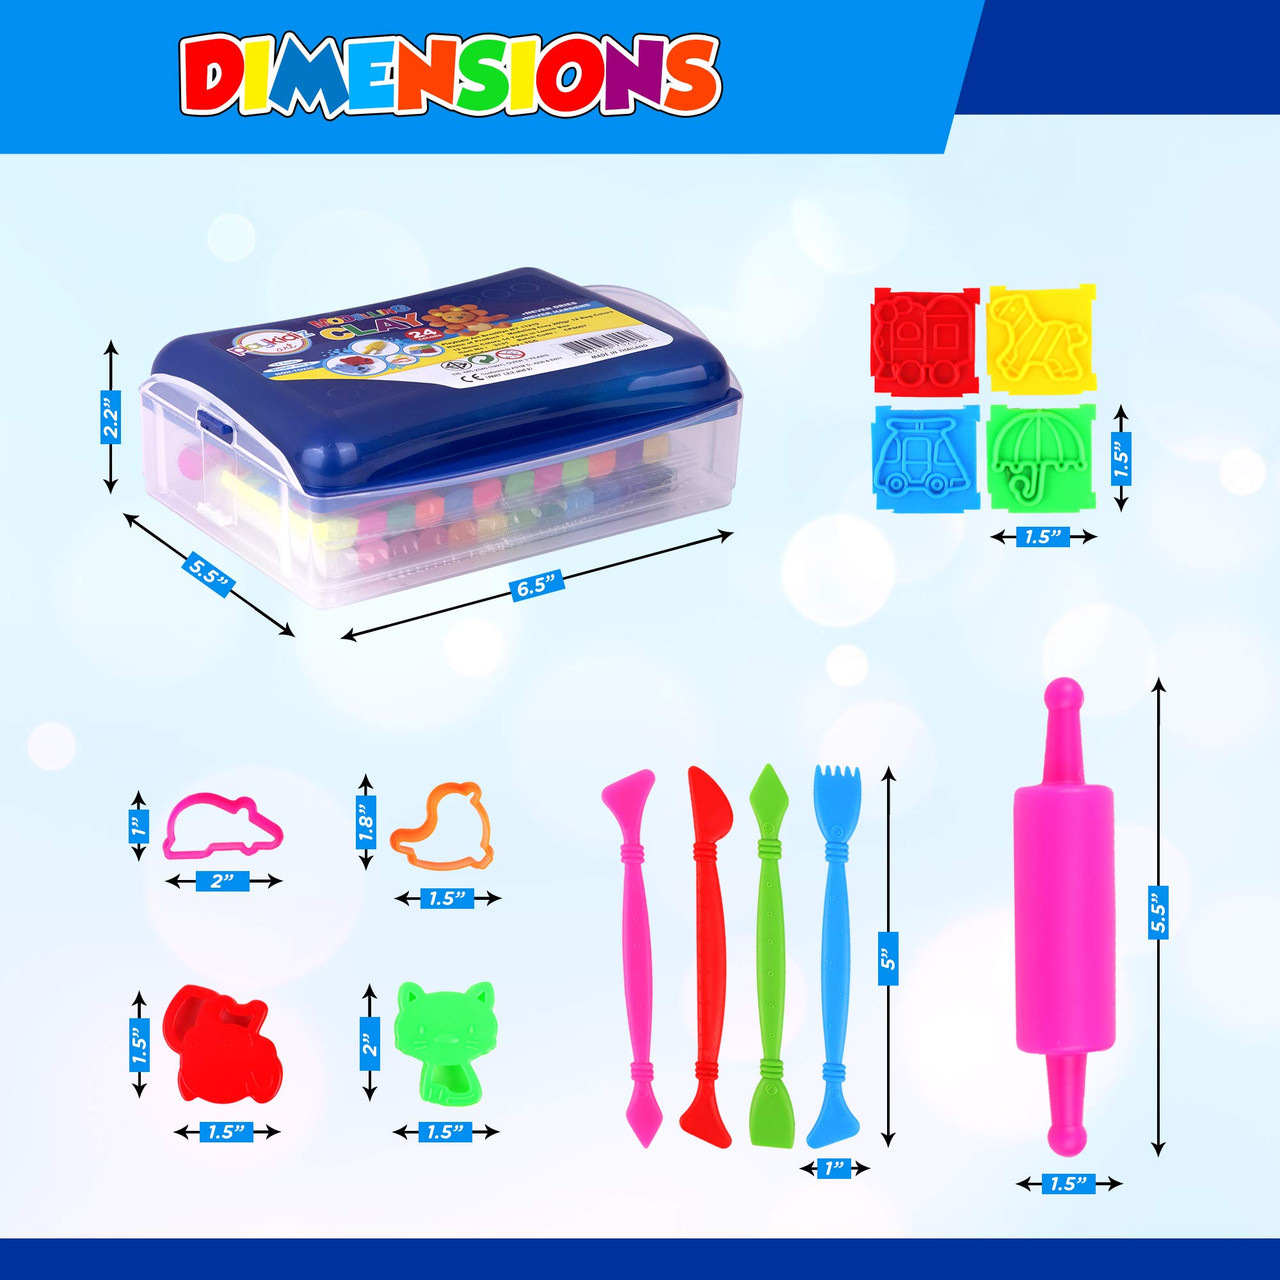 Playkidiz Art Modeling Clay 8 Neon Colors in PVC Clam Shell Box, Beginners  Pack 480 Grams, STEM Educational DIY Molding Set, at Home Crafts for Kids 